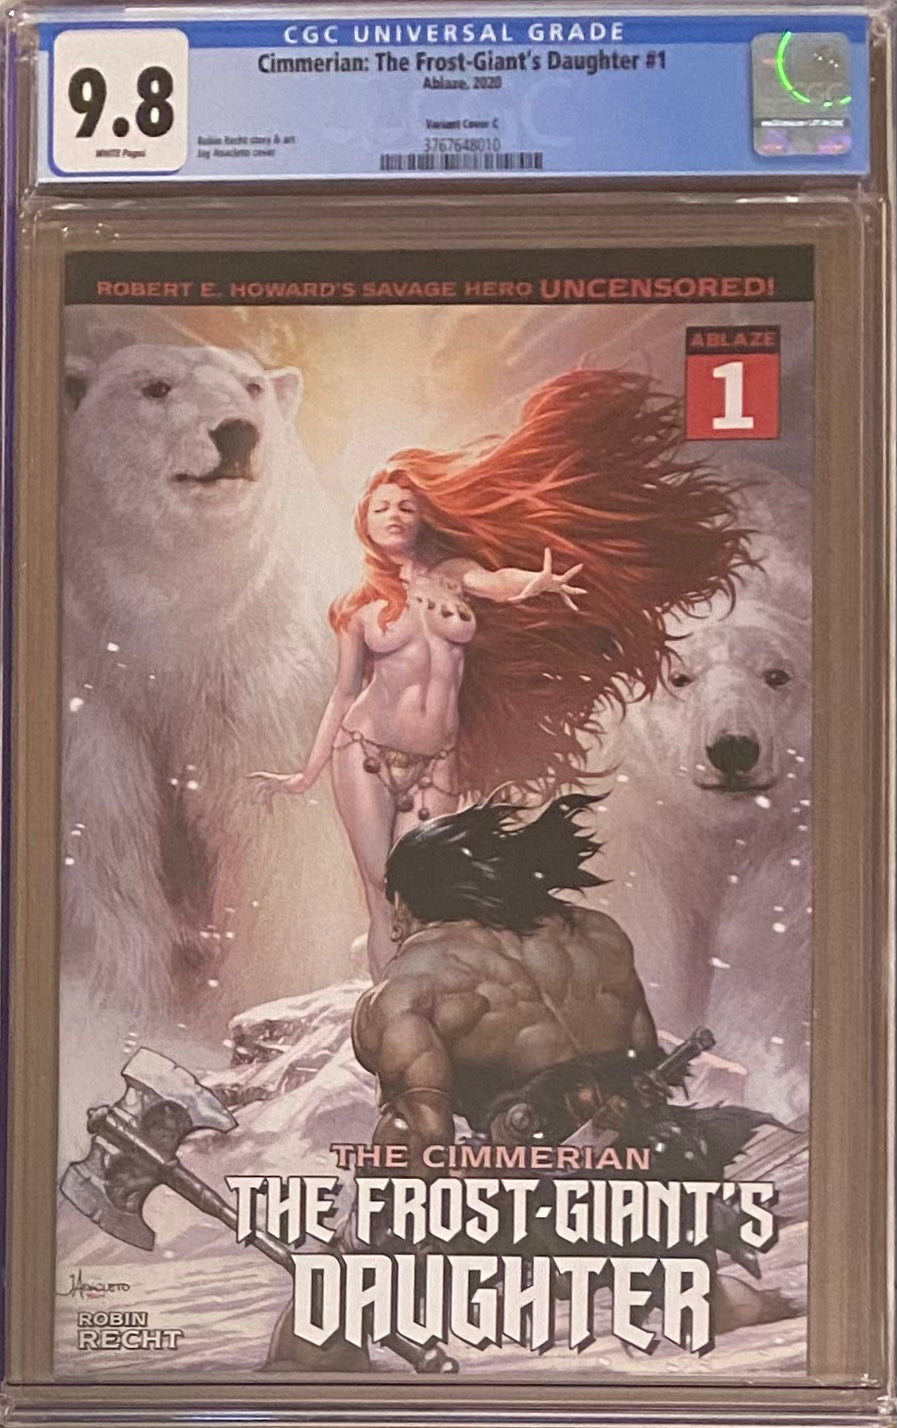 Cimmerian: The Frost Giant's Daughter #1 Variant C CGC 9.8